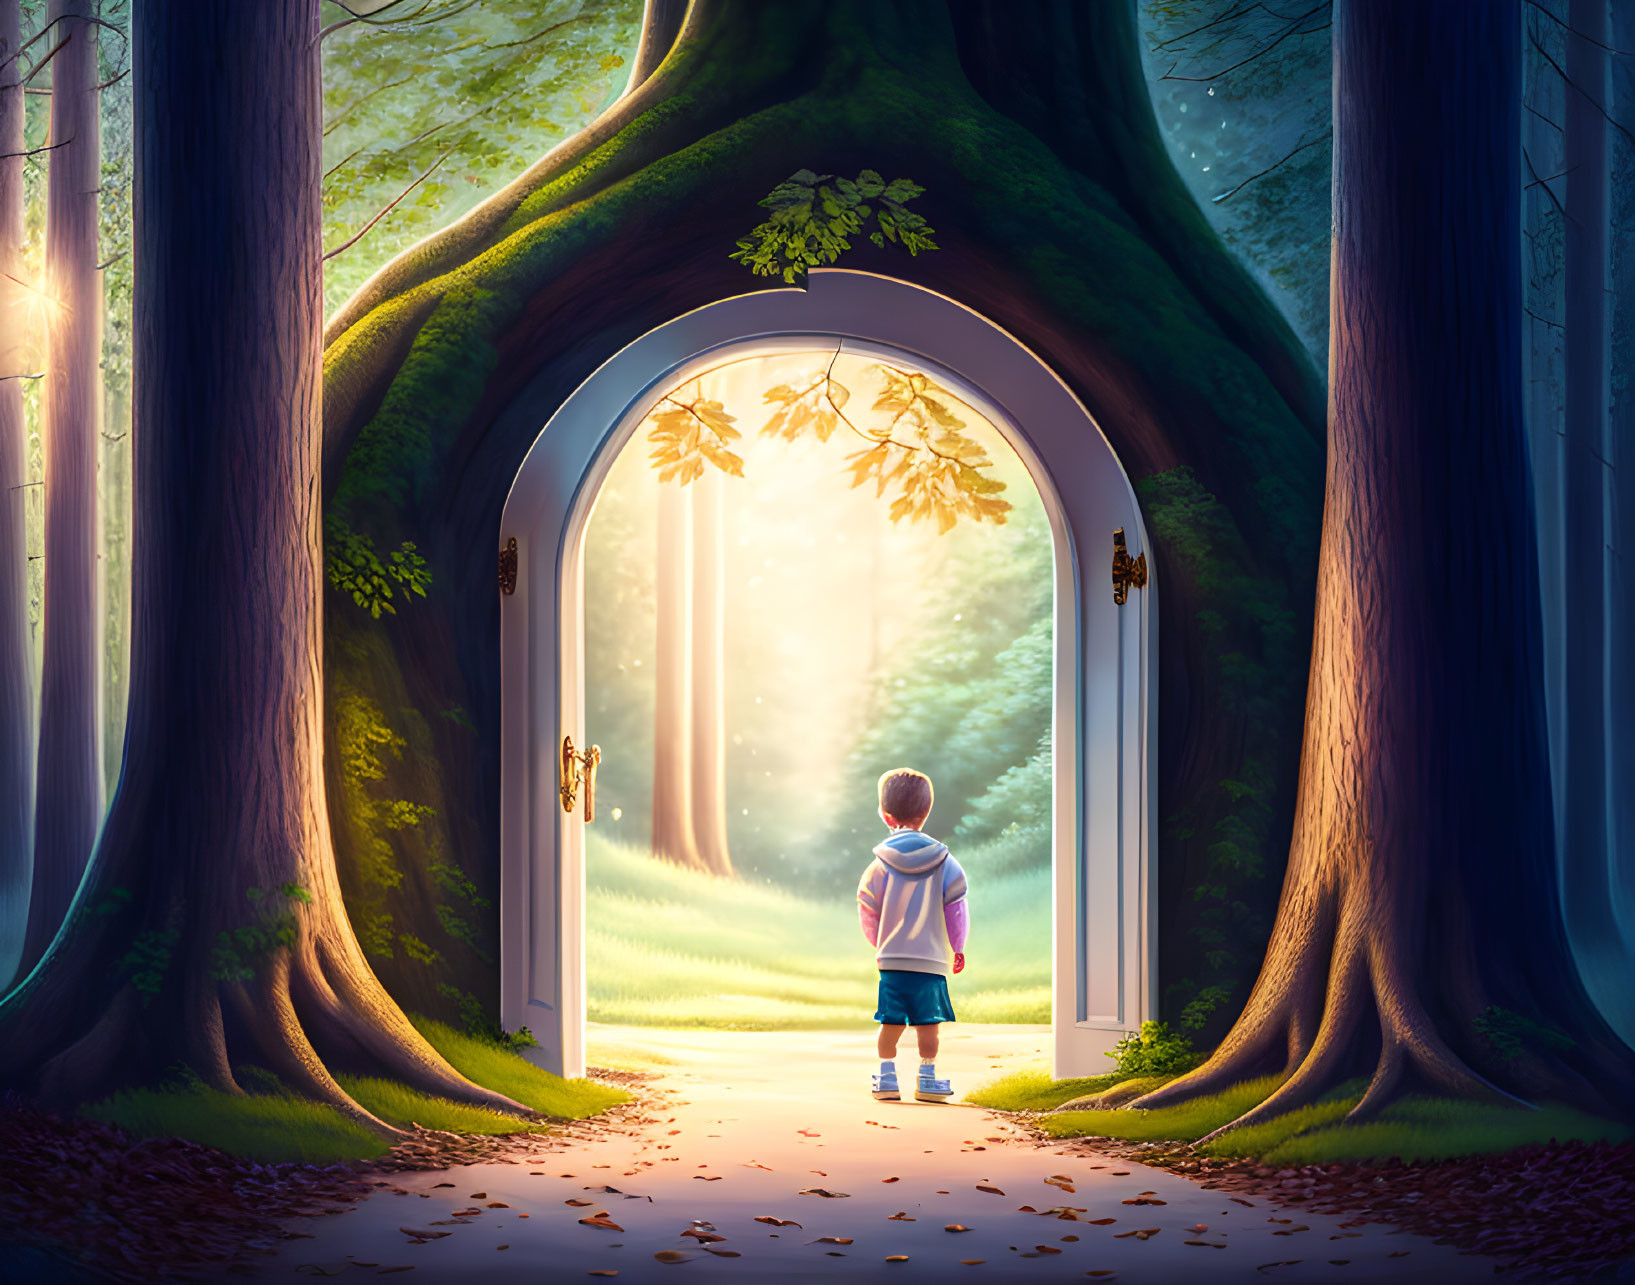 Child with backpack at door to enchanted forest in tree